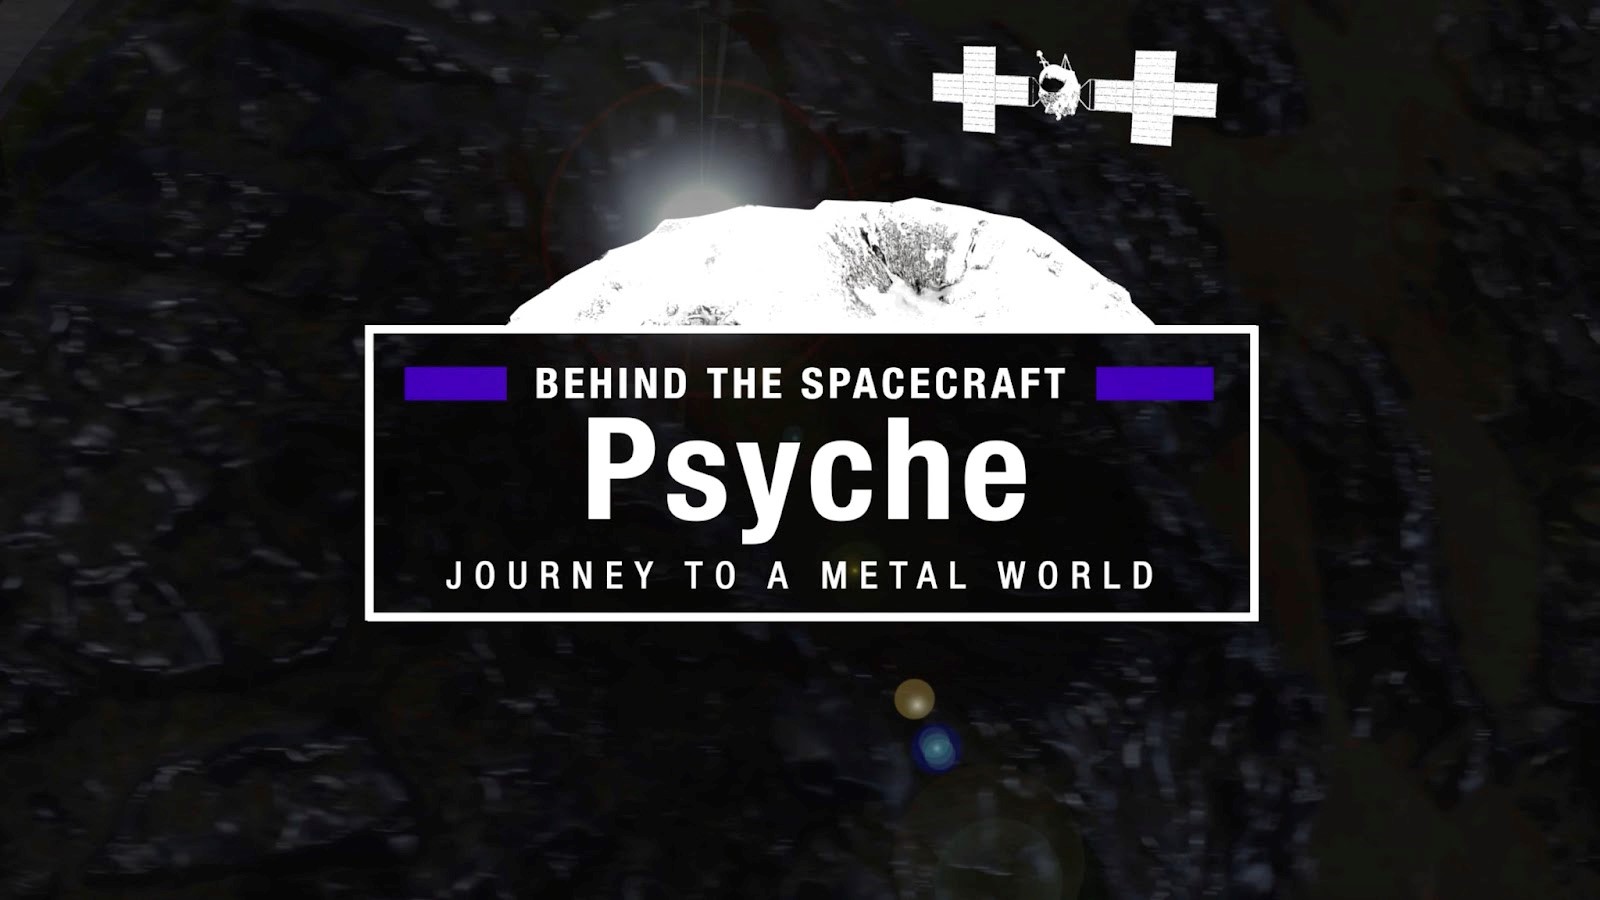 An illustration of asteroid Psyche with the spacecraft over it and a graphic promoting a video series.